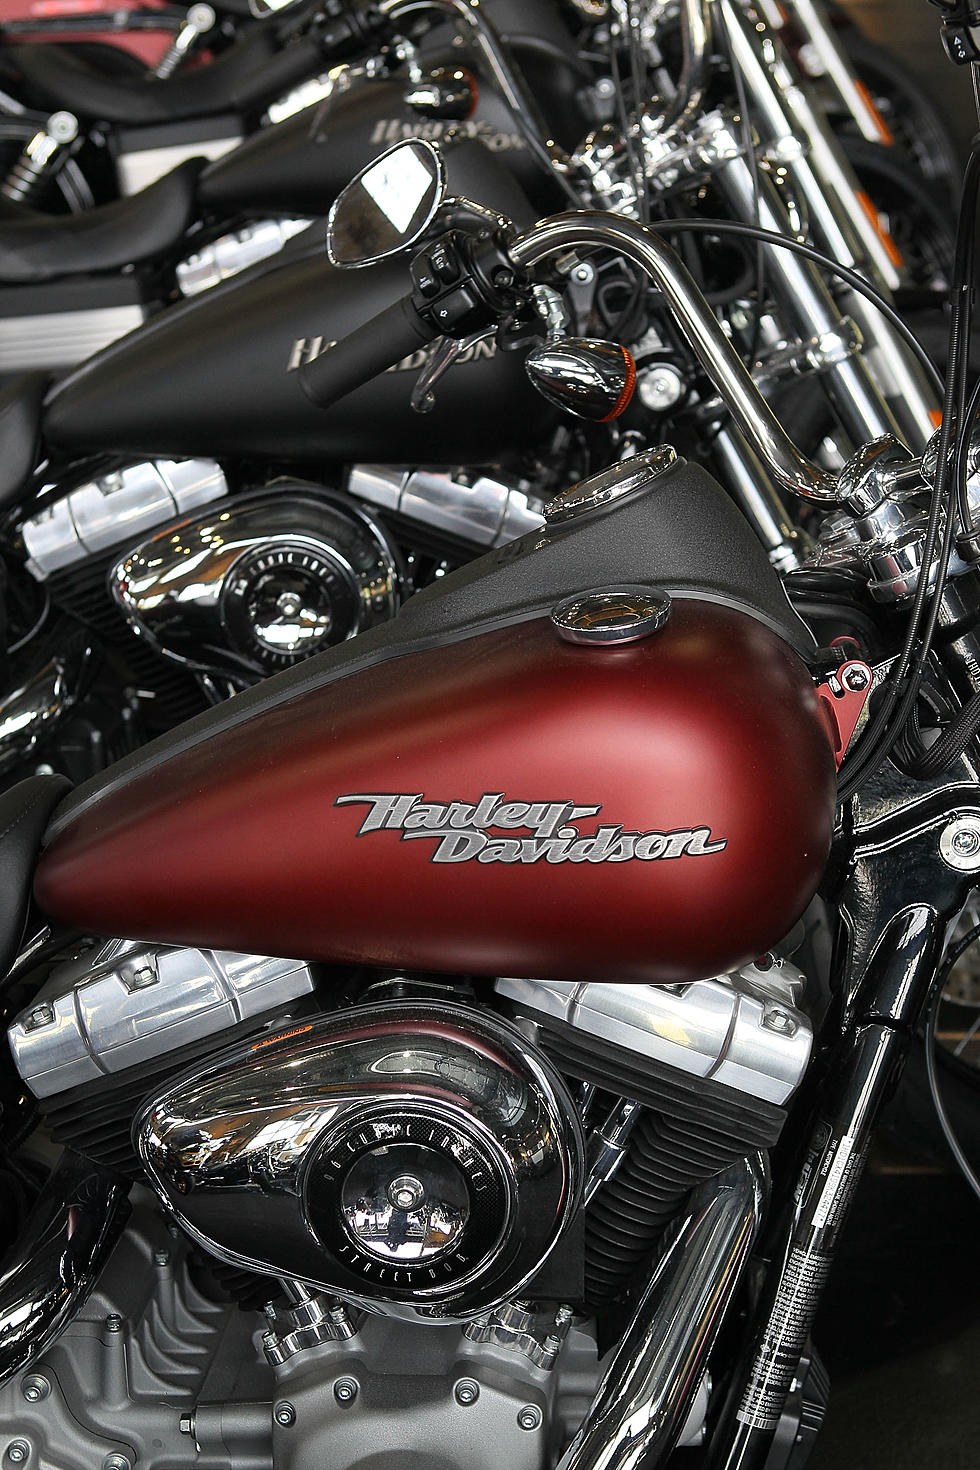 Fire Up The Harley Davidsons for Sunday’s Ride To Recovery